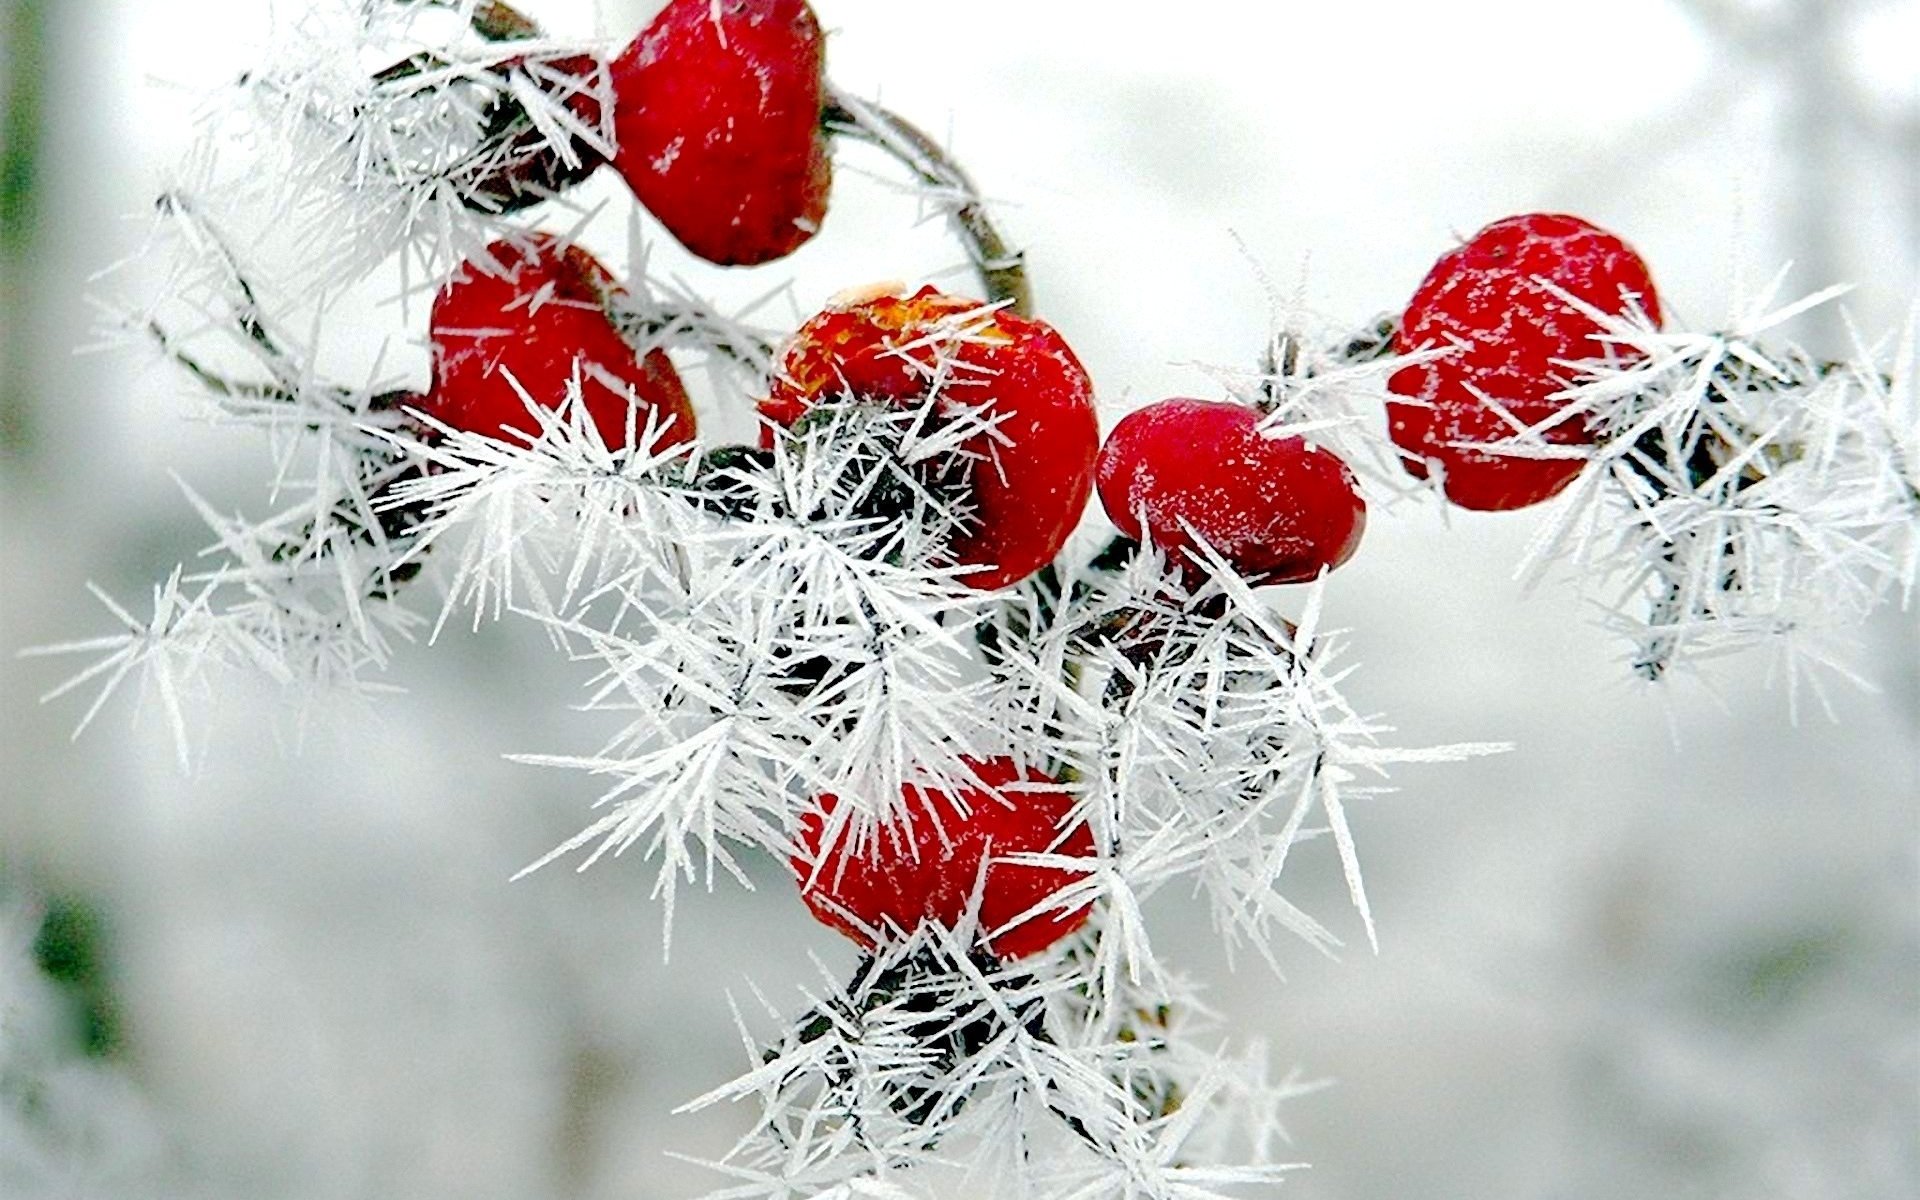 Nature winter red berries rose hips snow frost wallpaper 1920x1200 1920x1200